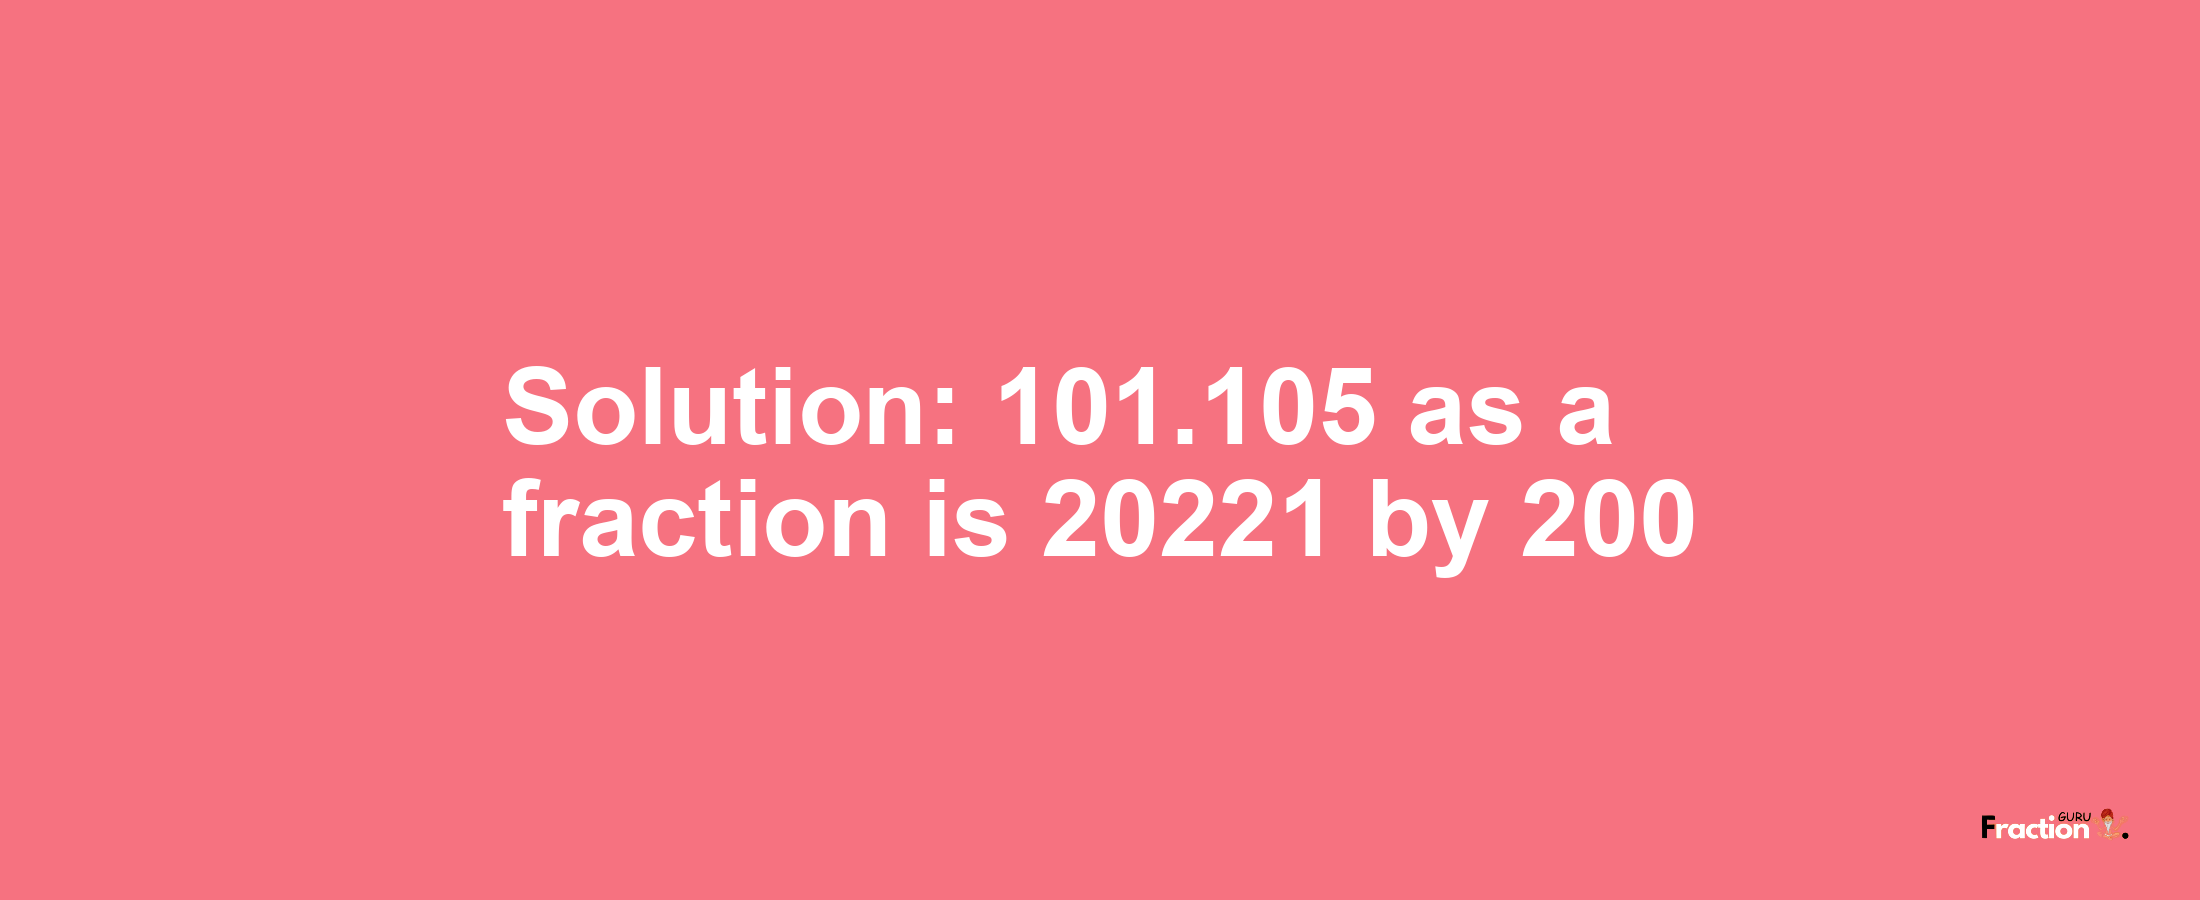 Solution:101.105 as a fraction is 20221/200